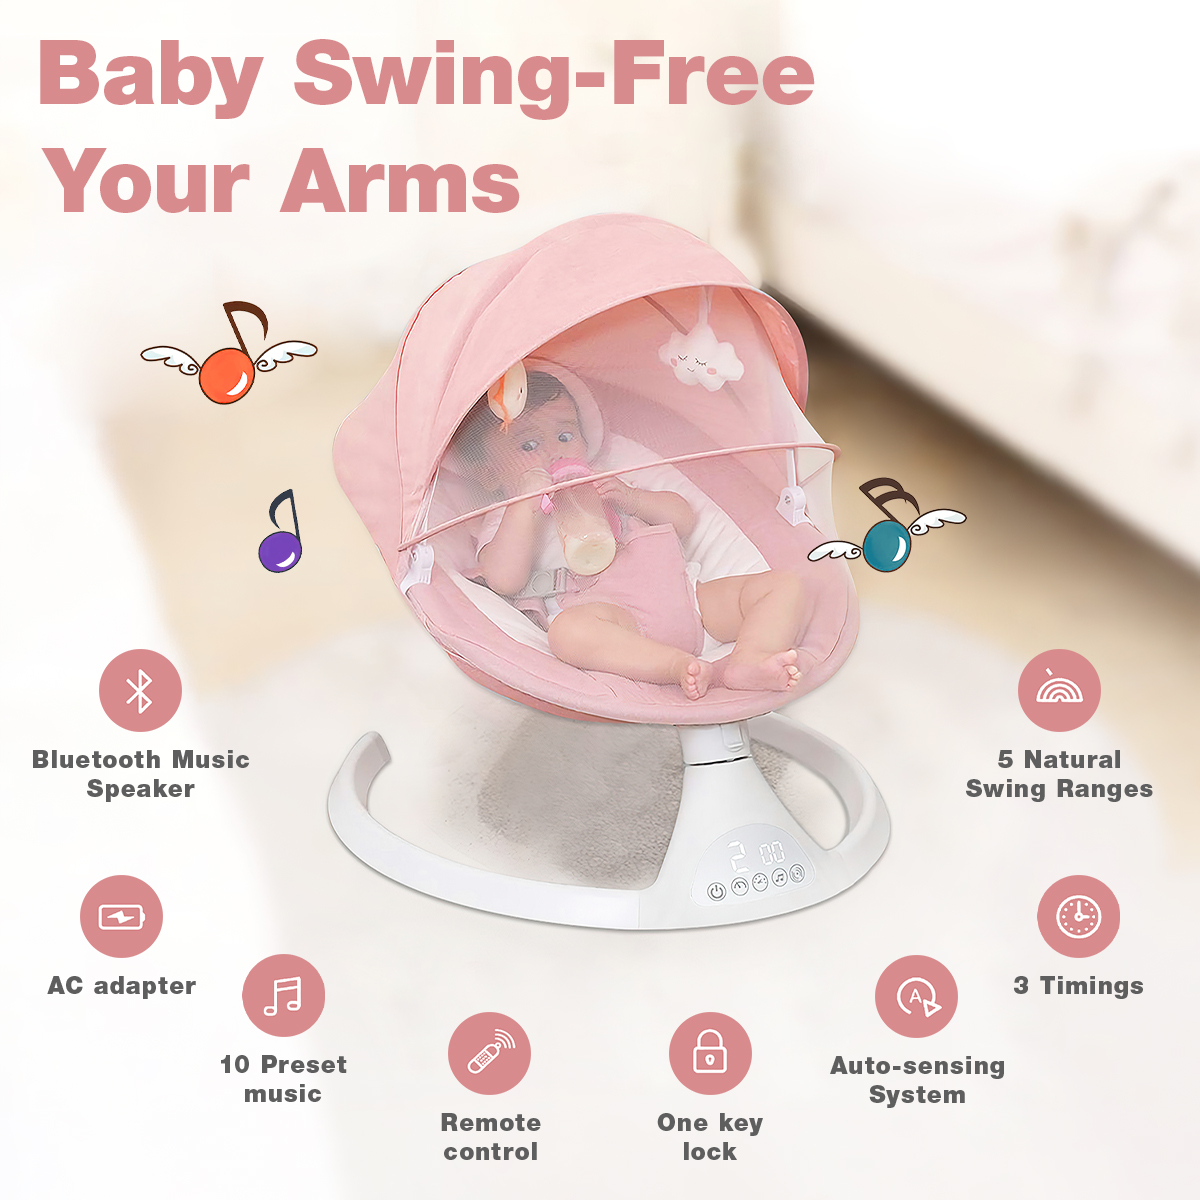 Yadala Baby Swing, Electric Baby Swings for Infants Baby Bouncer with Remote Control and Music, Pink - image 2 of 8